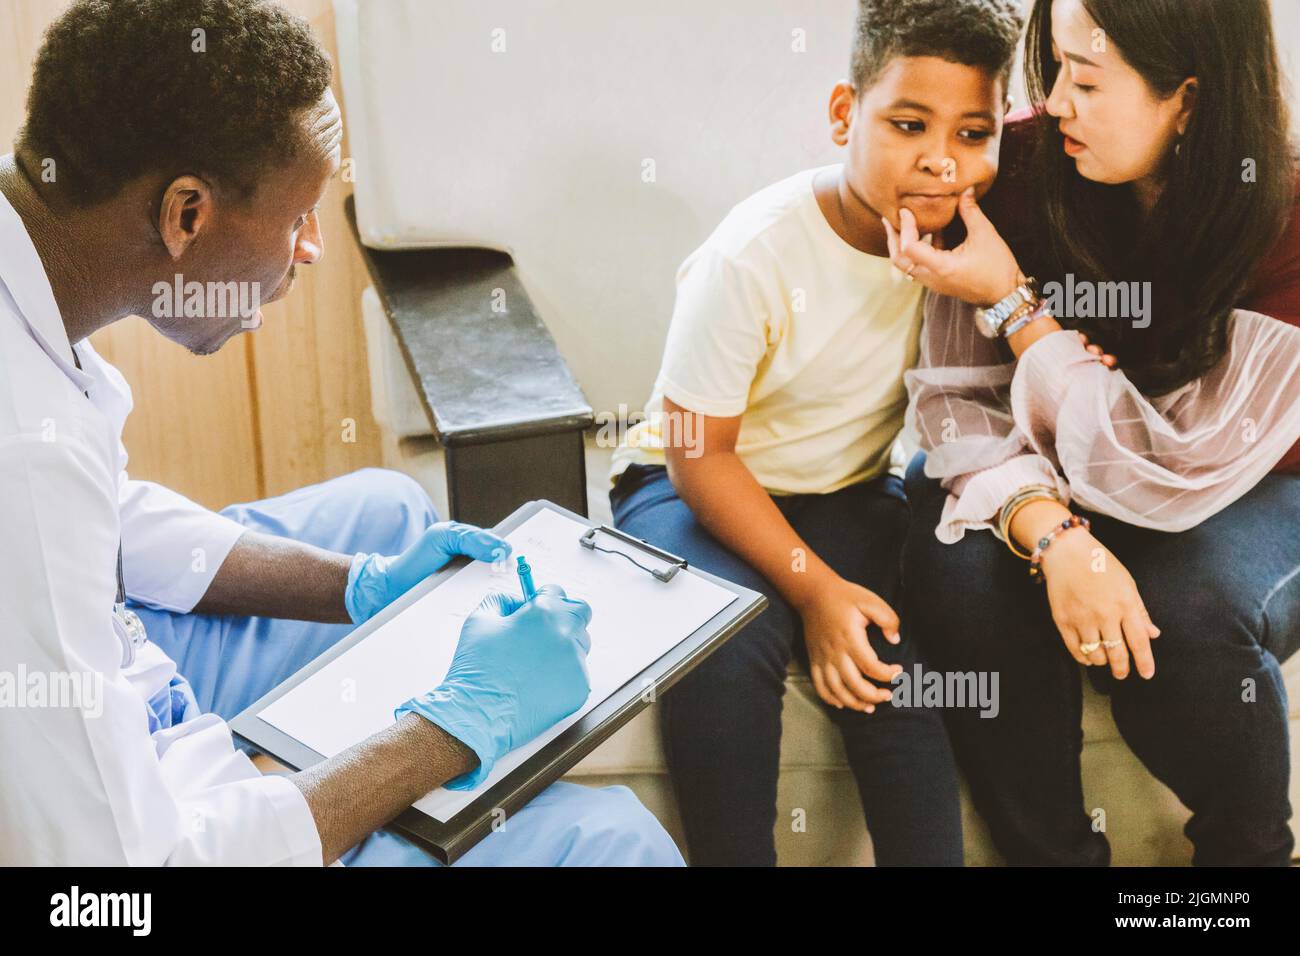 family psychologist. asian mother and her boy talk to african american psychotherapist doctor during therapy session at the hospital. Stock Photo